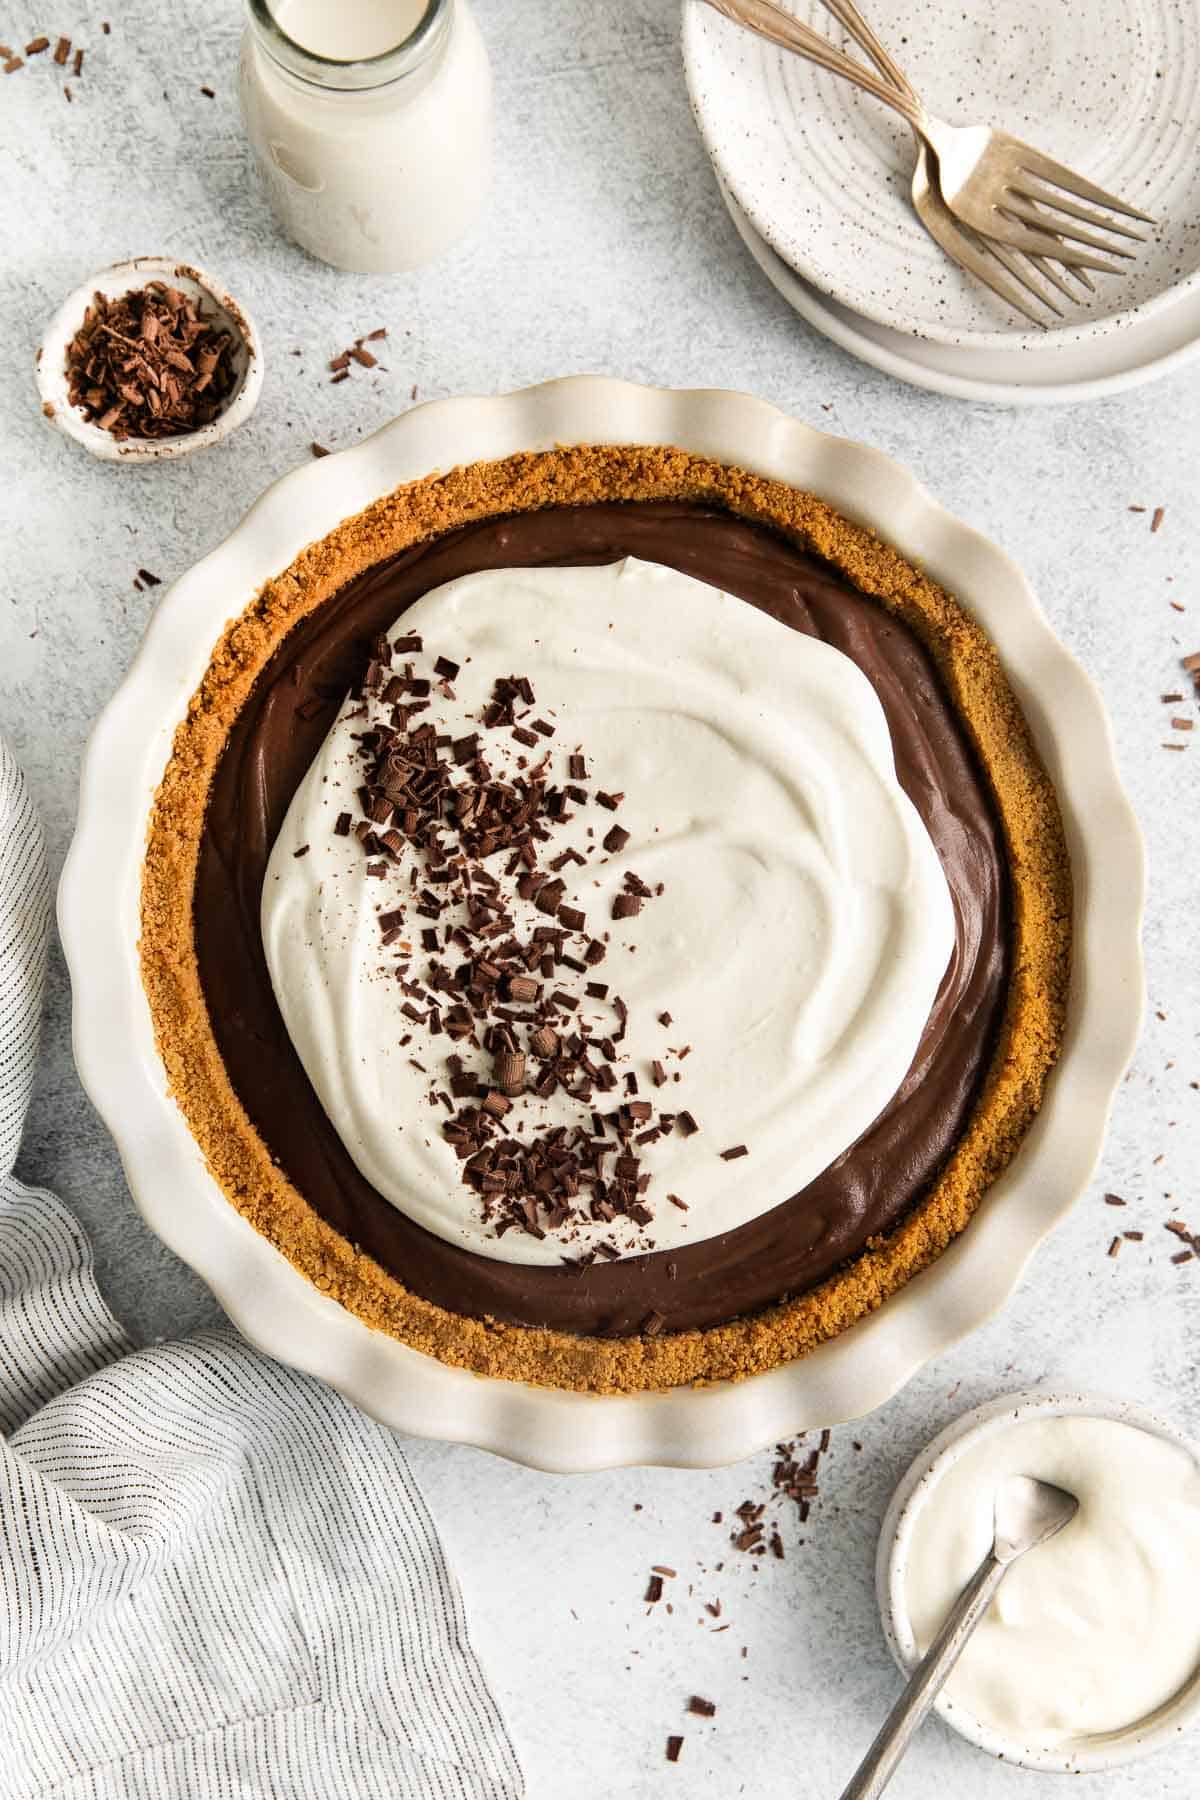 A overhead view of the gluten-free chocolate pie in a pie dish